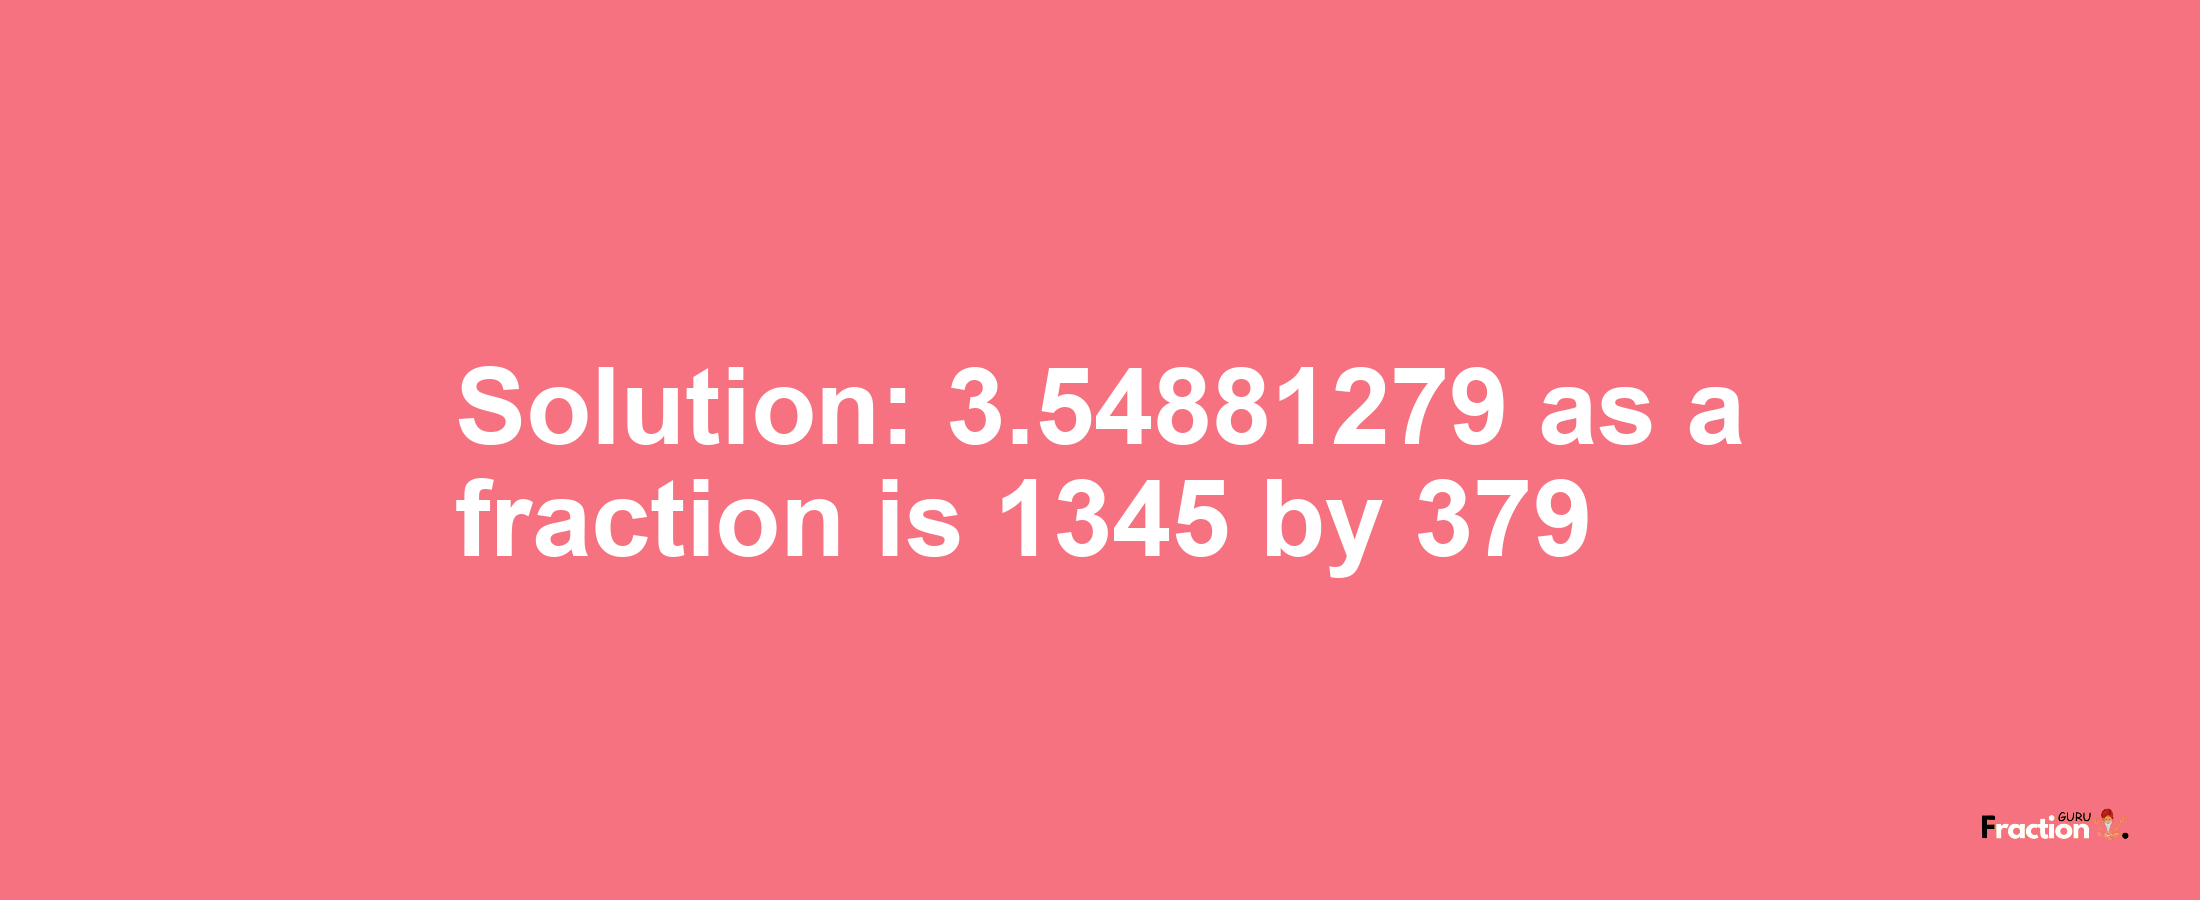 Solution:3.54881279 as a fraction is 1345/379